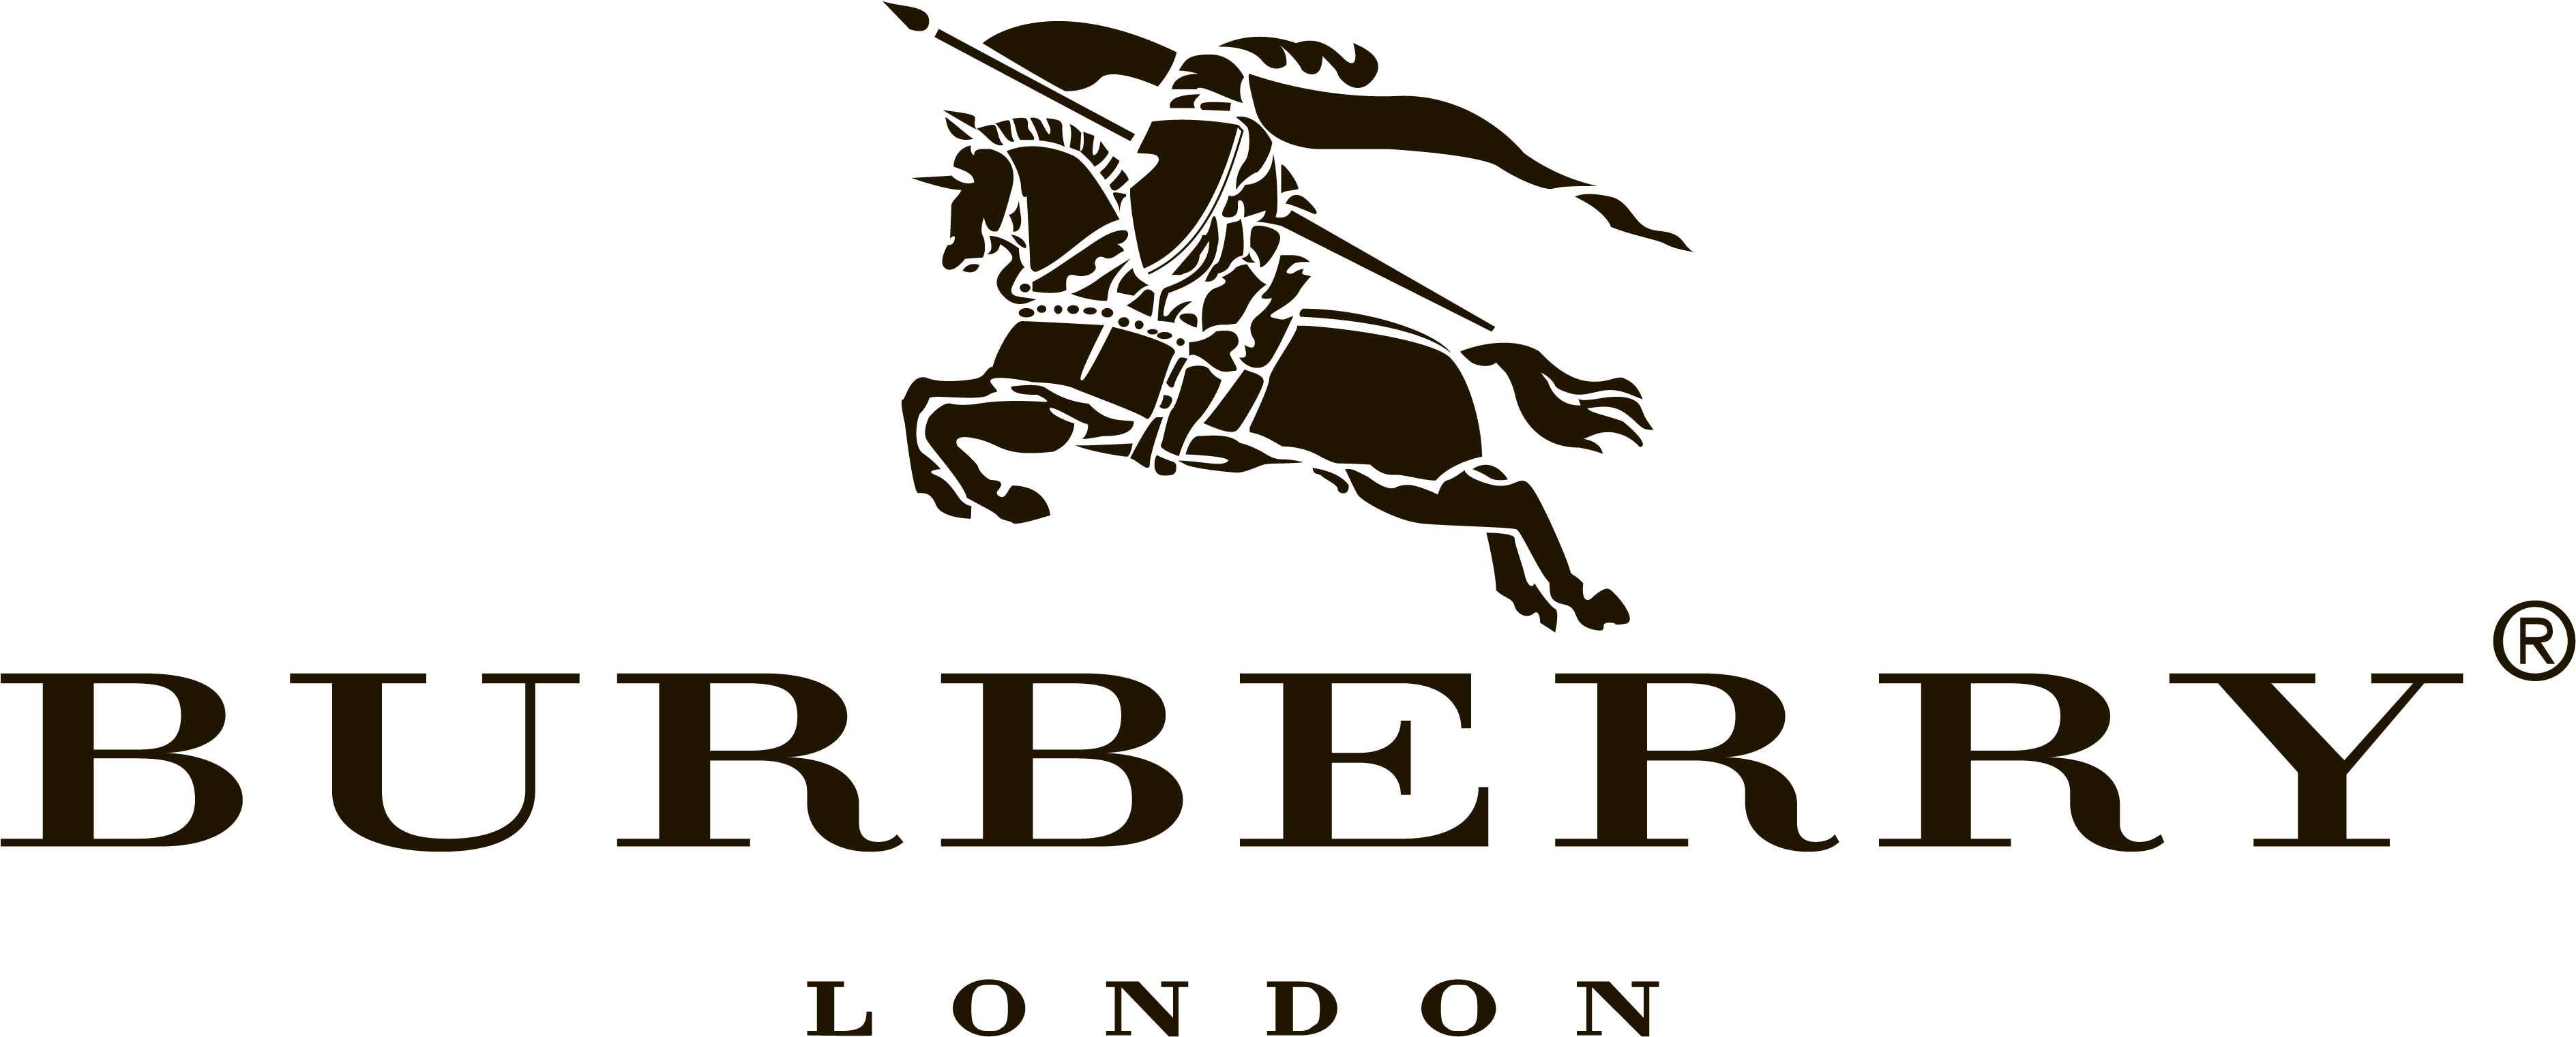 Burberry Logo - Free Transparent PNG Download - PNGkey